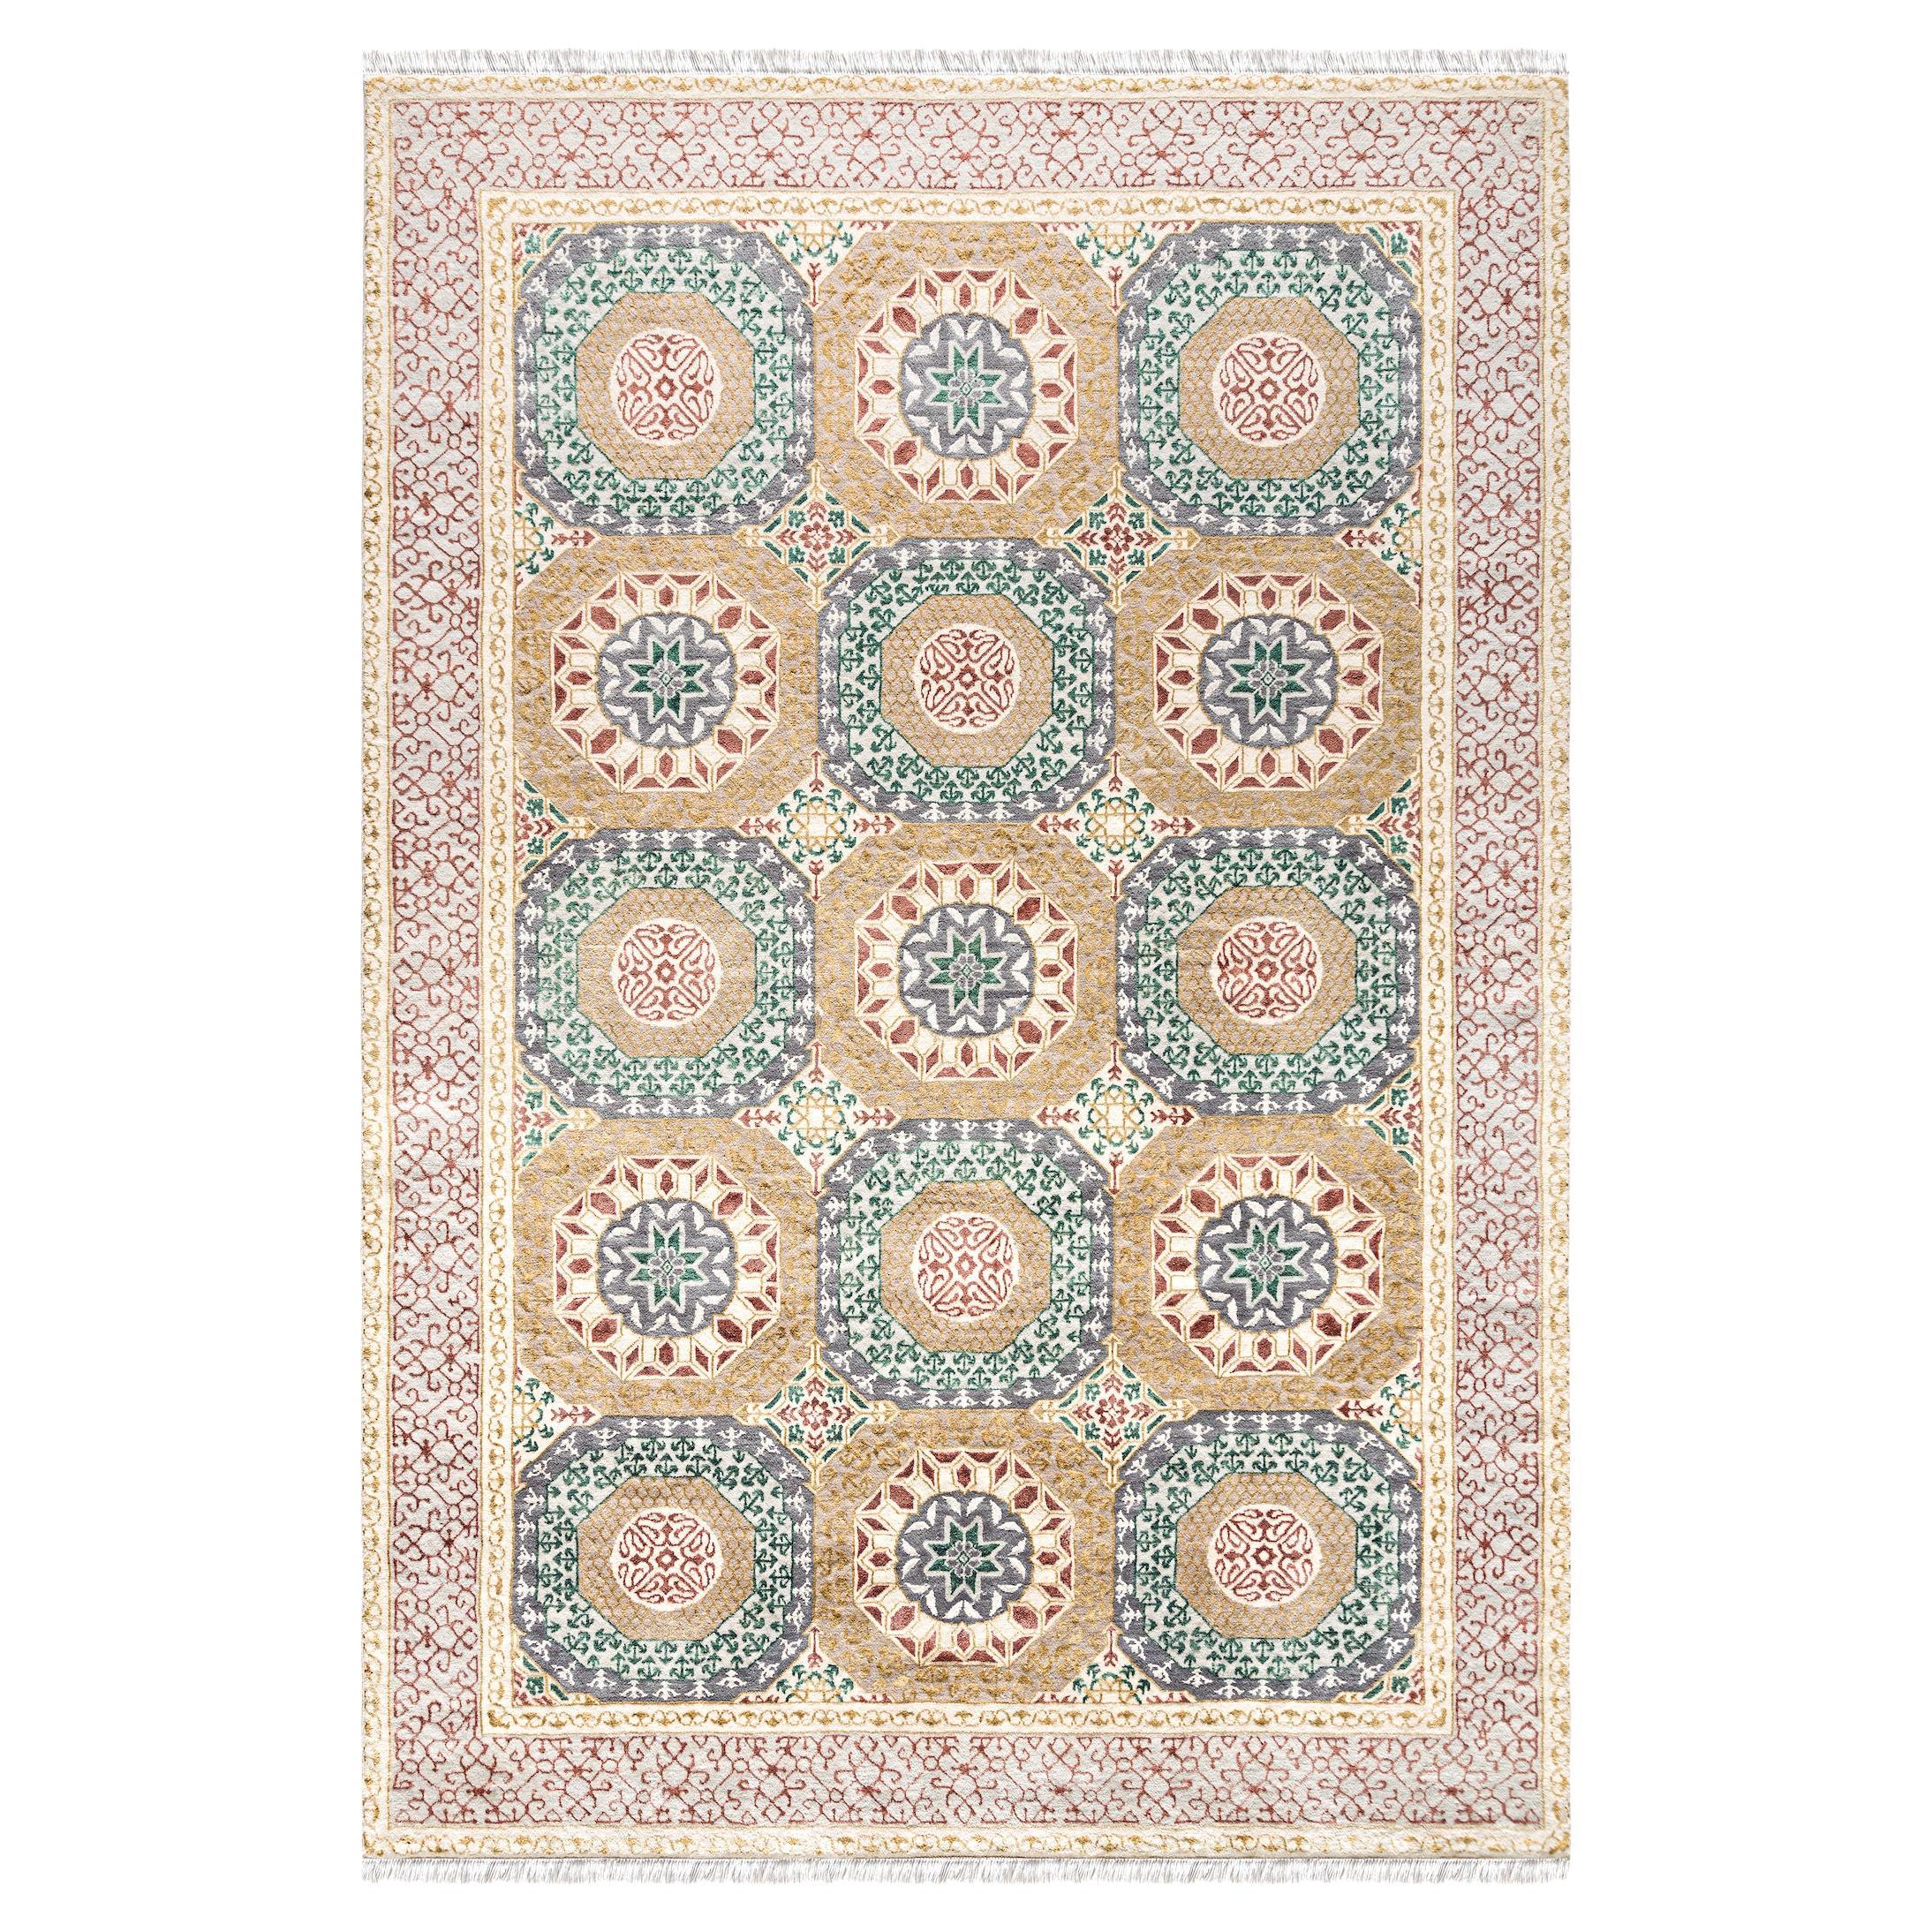 Kahhal Looms Mamluk Constellation Hand-Knotted 300x200cm Rug